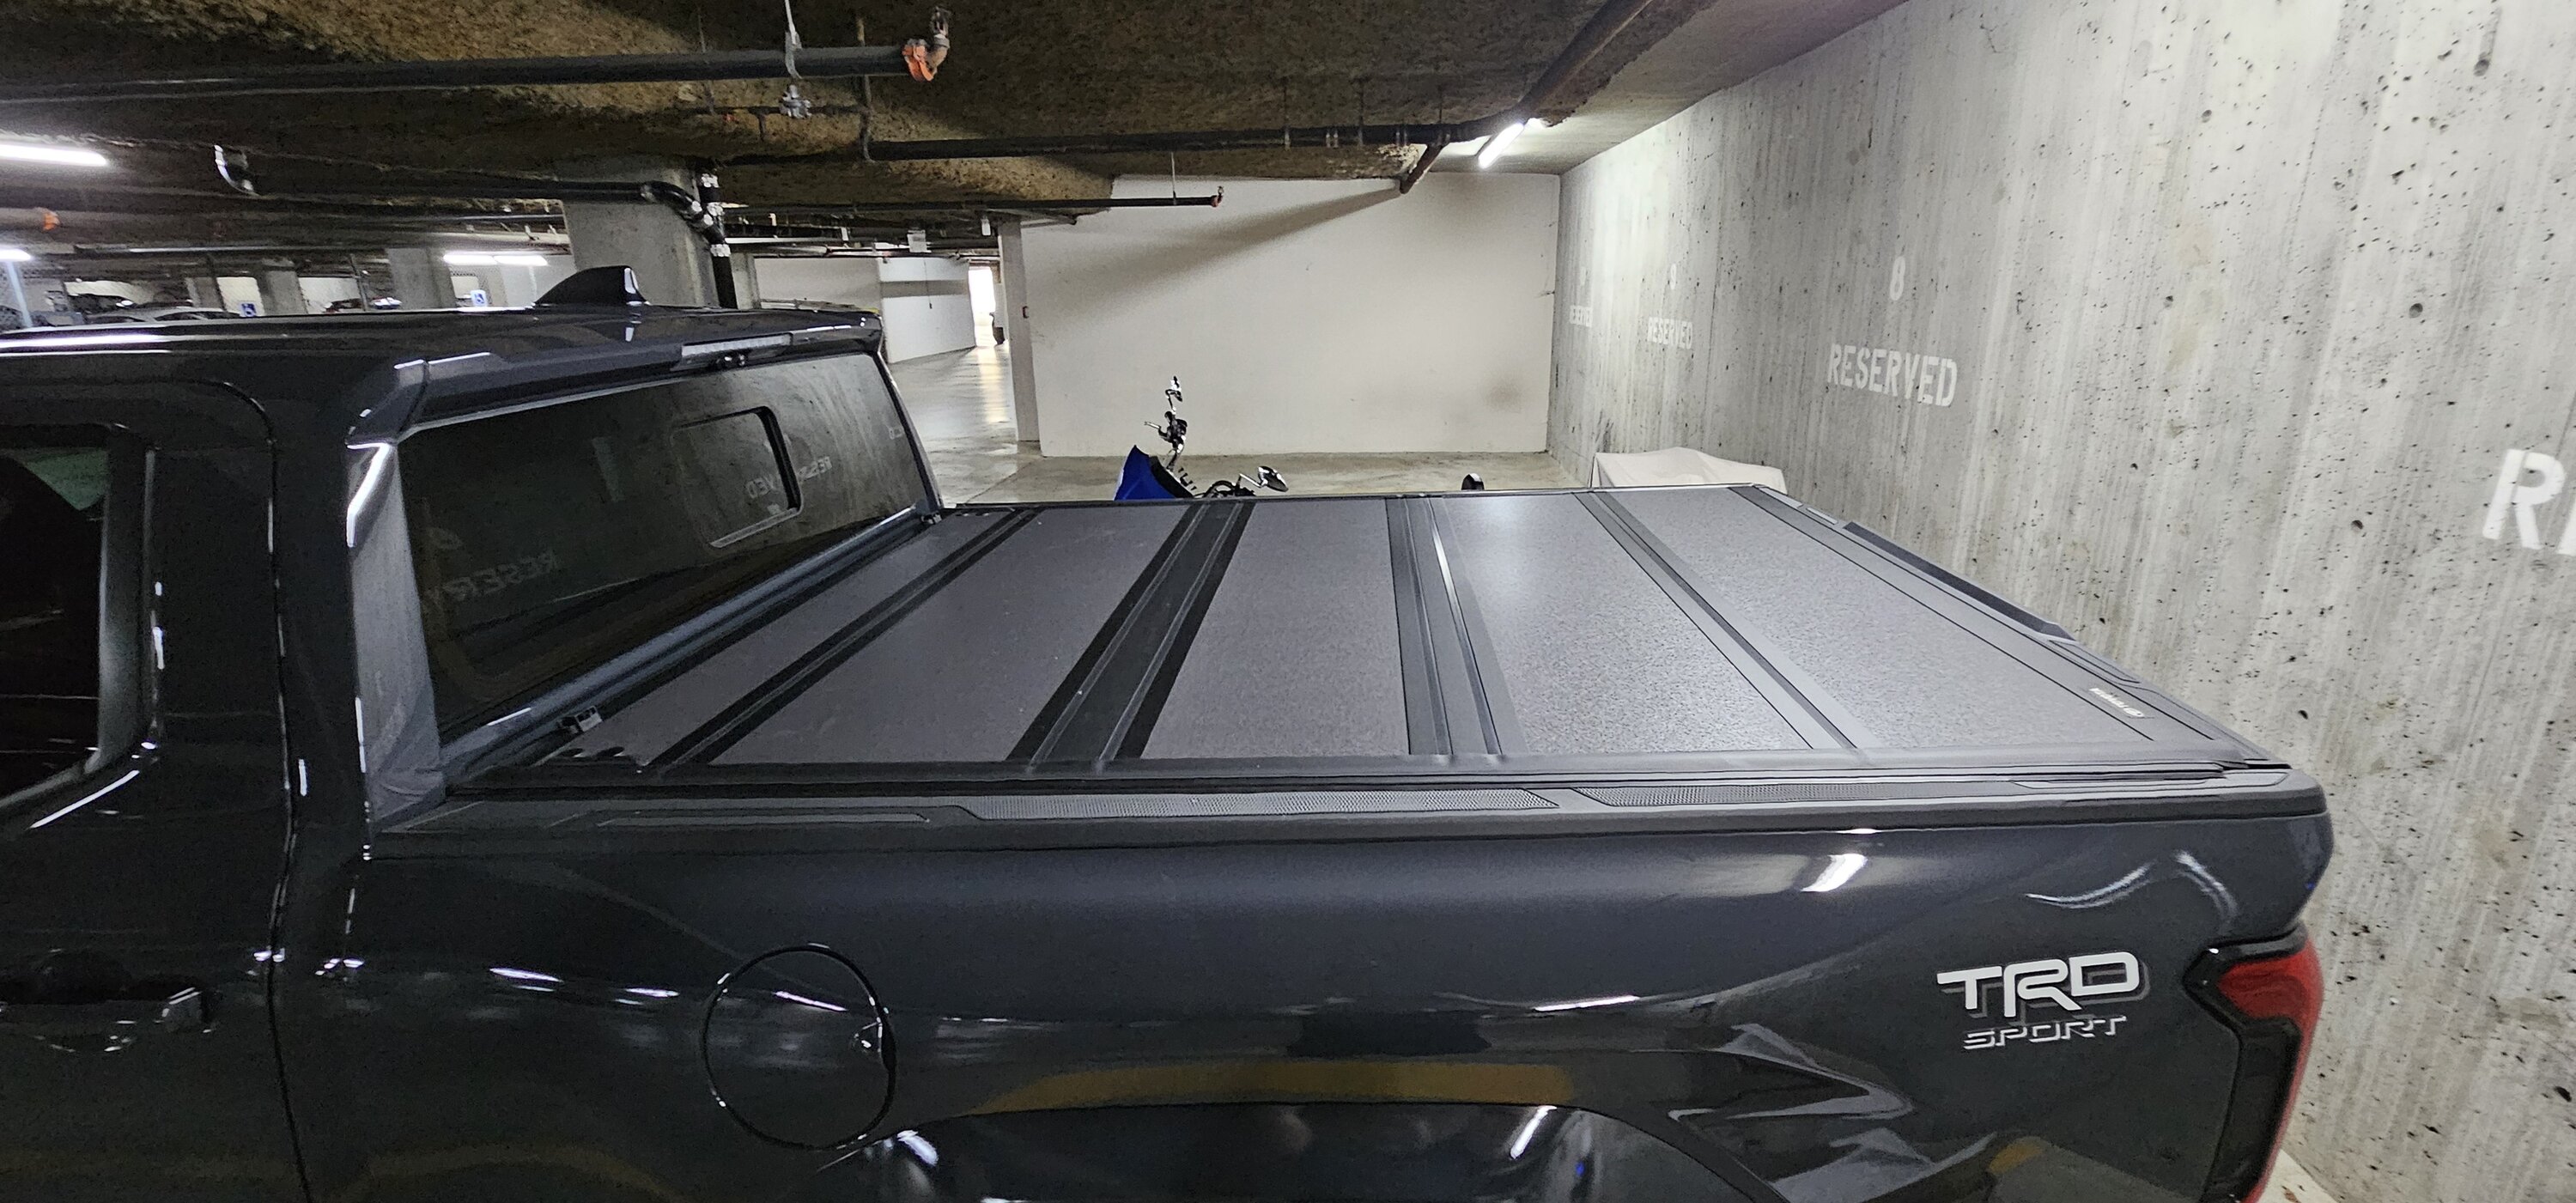 2024 Tacoma 6' Foot Bed Toyota OEM Tonneau Cover Installed (Part Number # PT954-35241) on 2024 Tacoma TRD Sport 20240509_141335